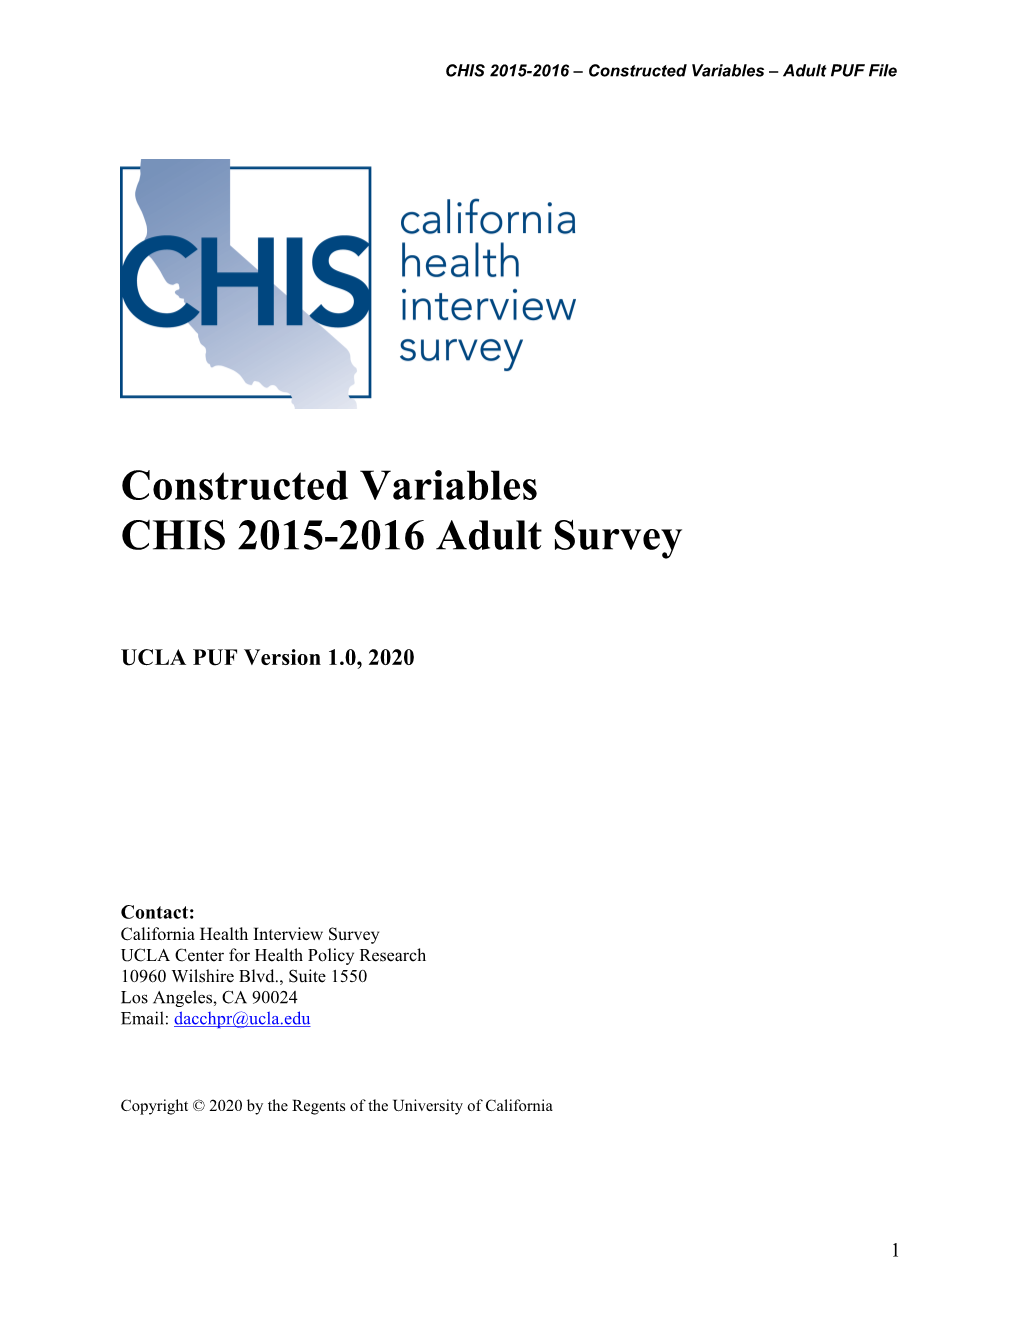 Constructed Variables CHIS 2015-2016 Adult Survey